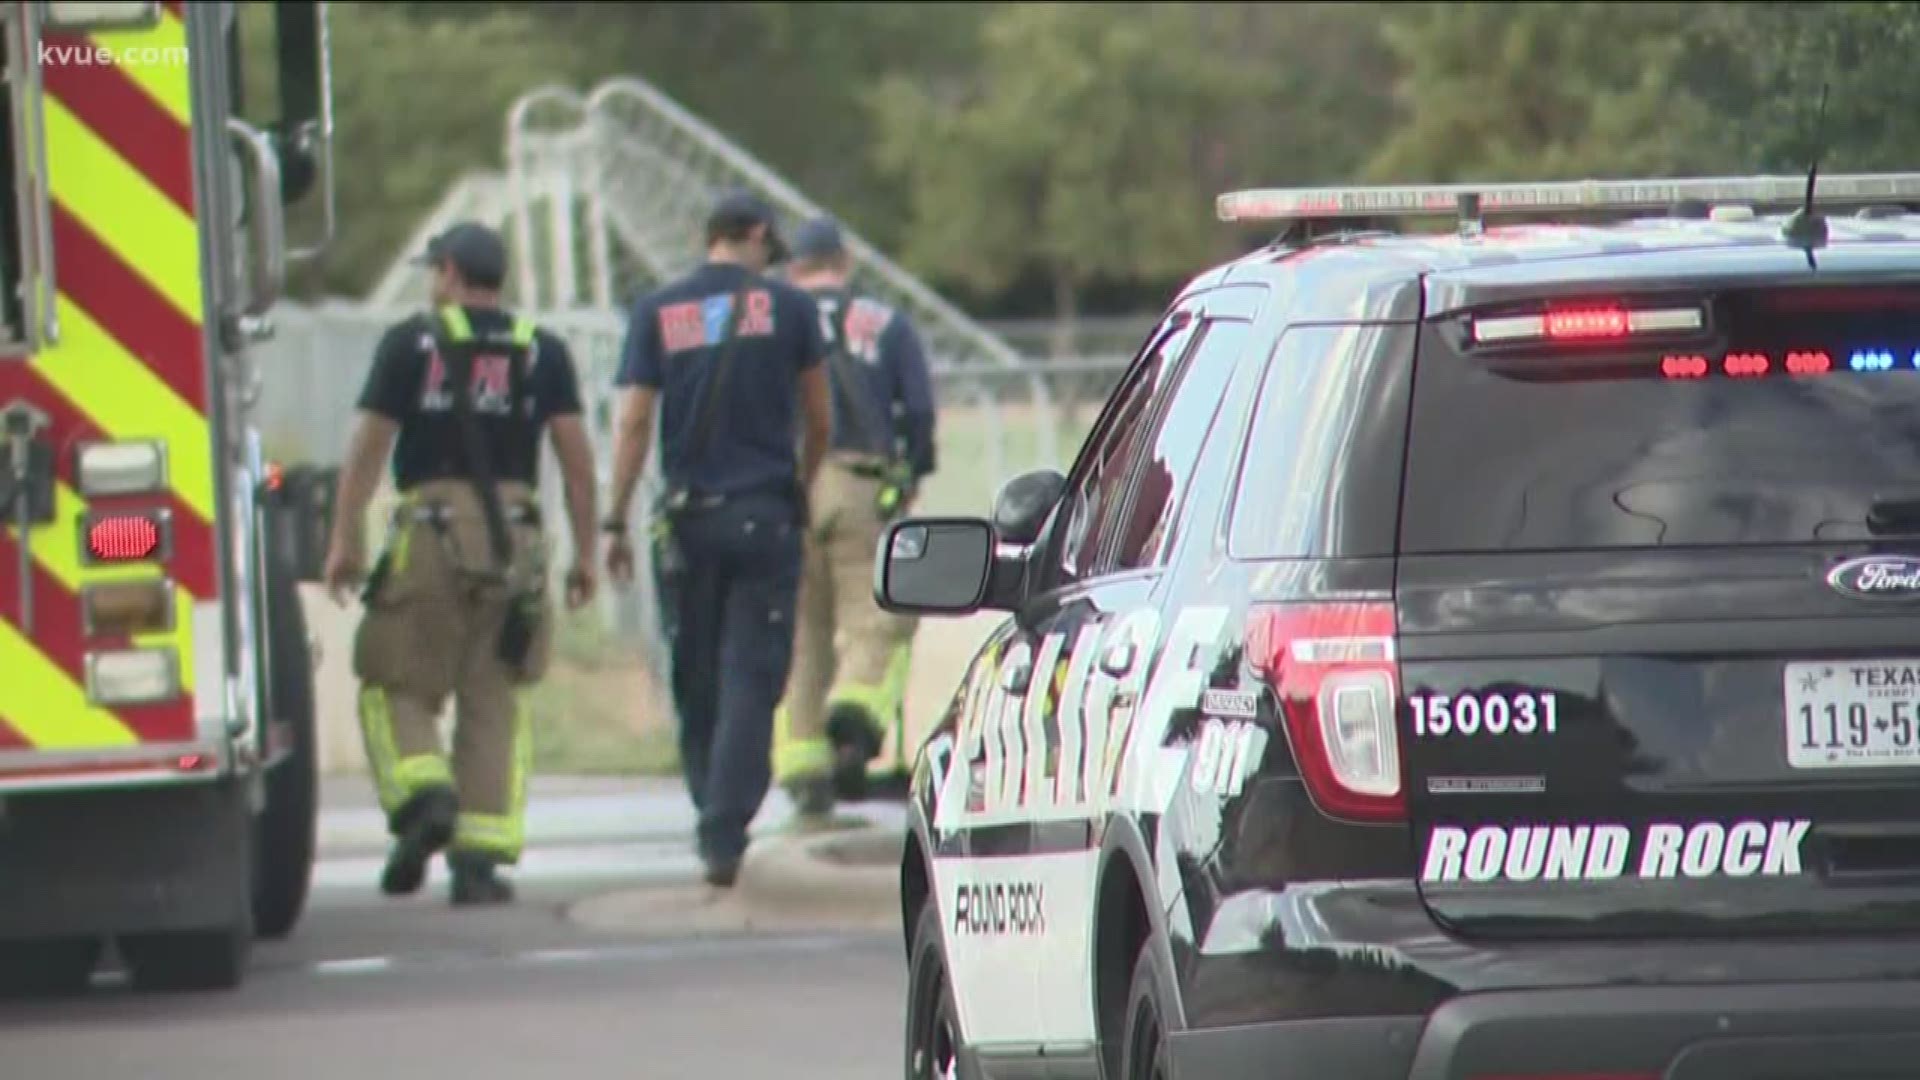 A driver will not face charges for hitting and killing a three-year-old in Round Rock.